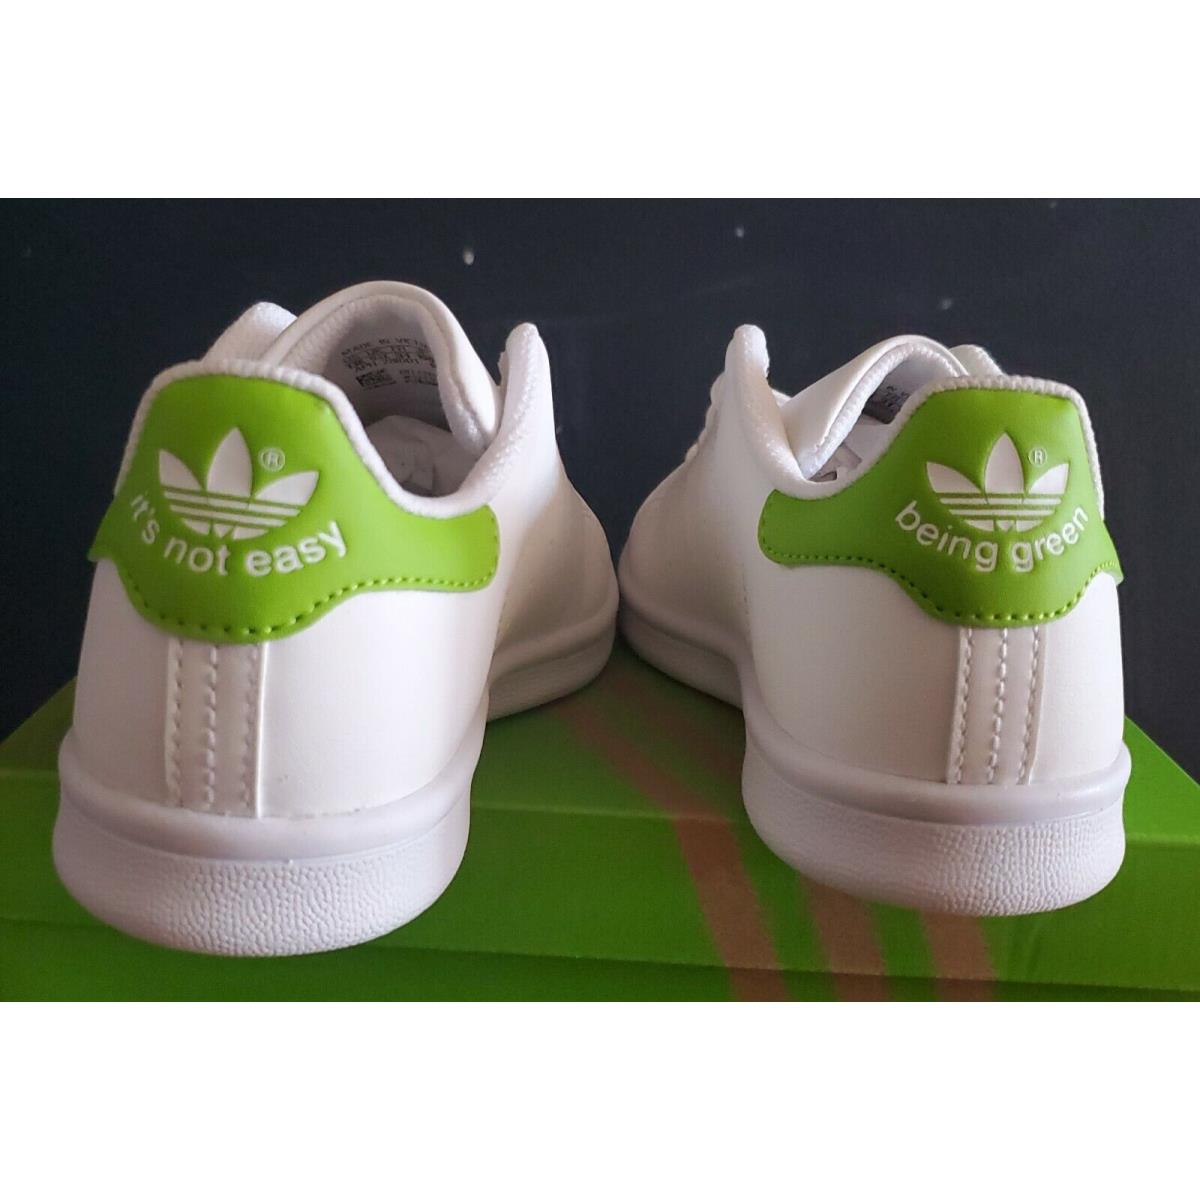 Adidas shoes THE MUPPETS - Footwear white/Pantone 1